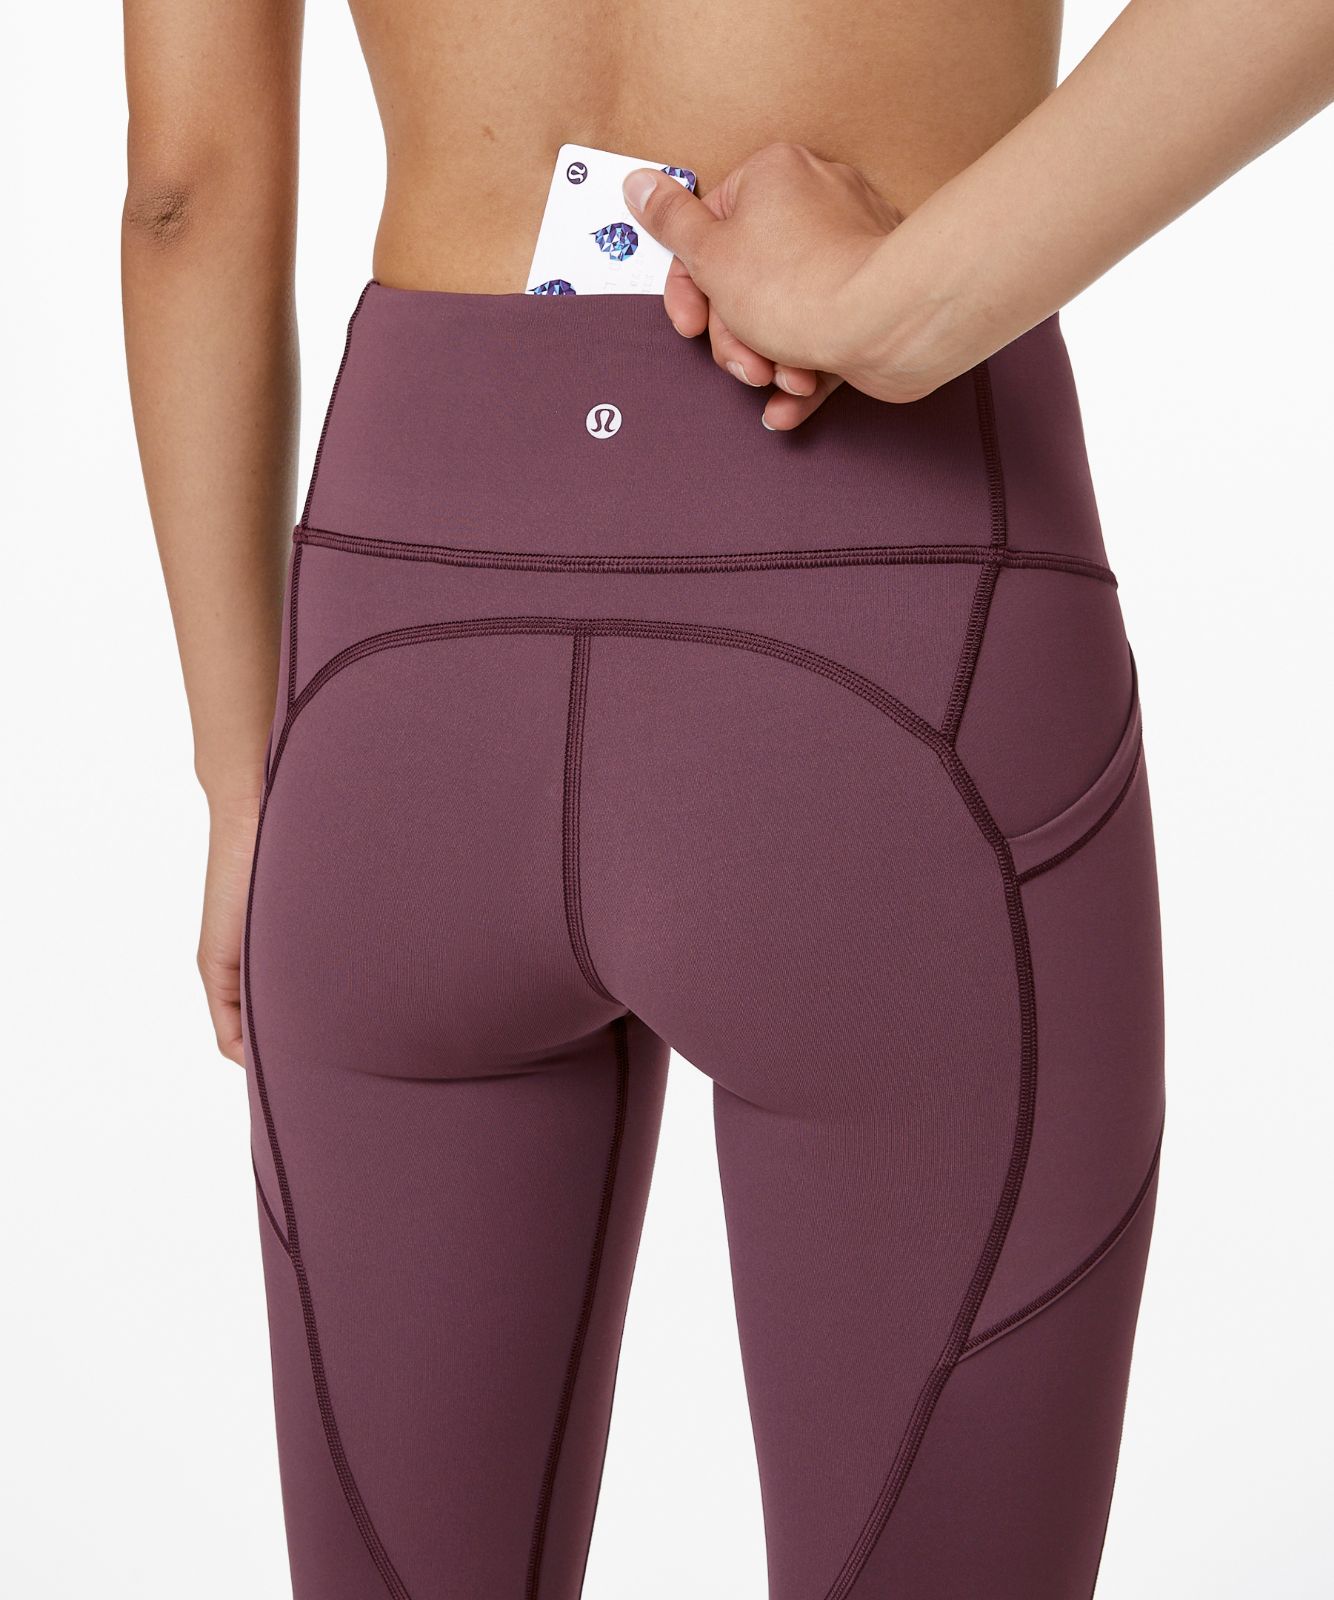 Lululemon All The Right Places Crop II 23 Full On Luxtreme